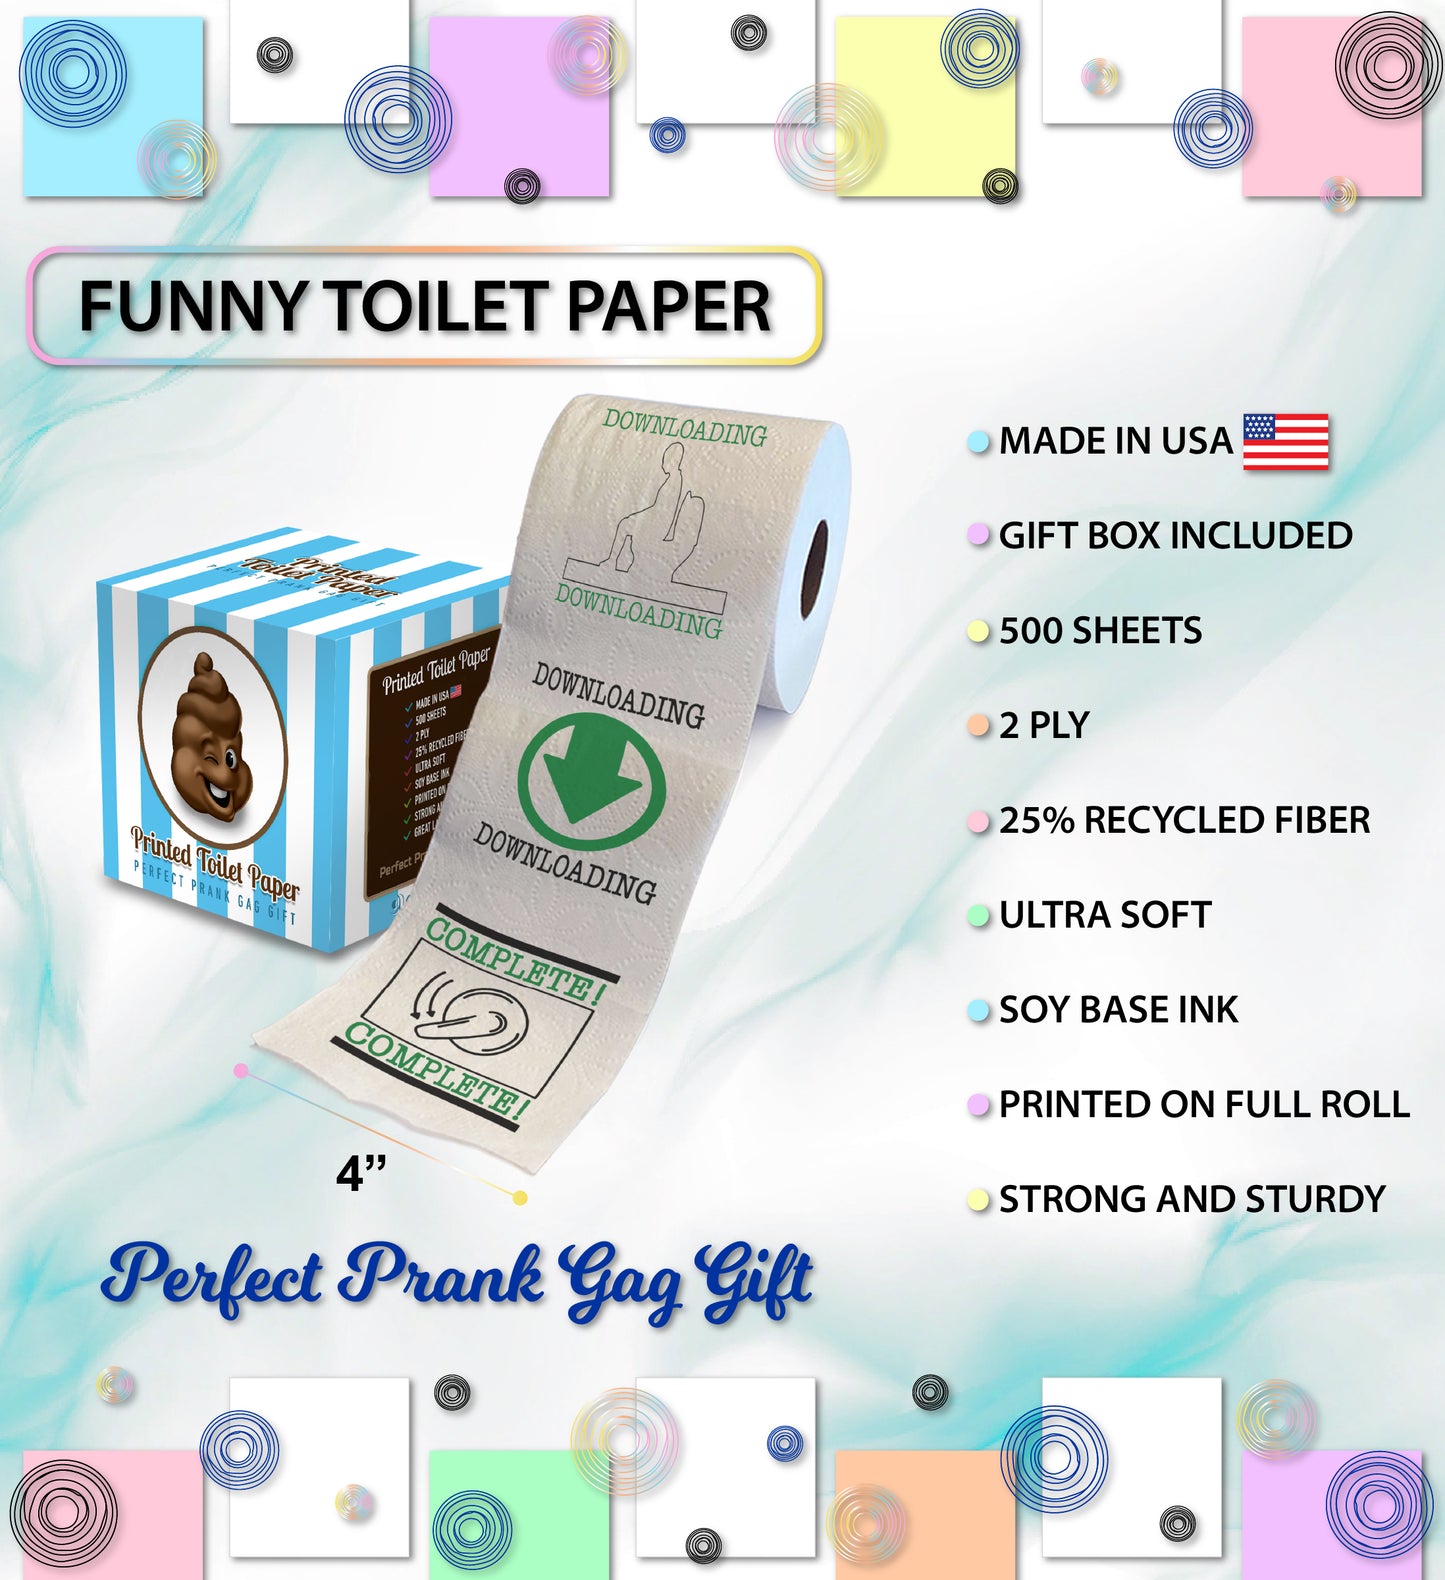 Printed TP Downloading Complete Printed Toilet Paper Funny Gag Gift – 500 Sheet